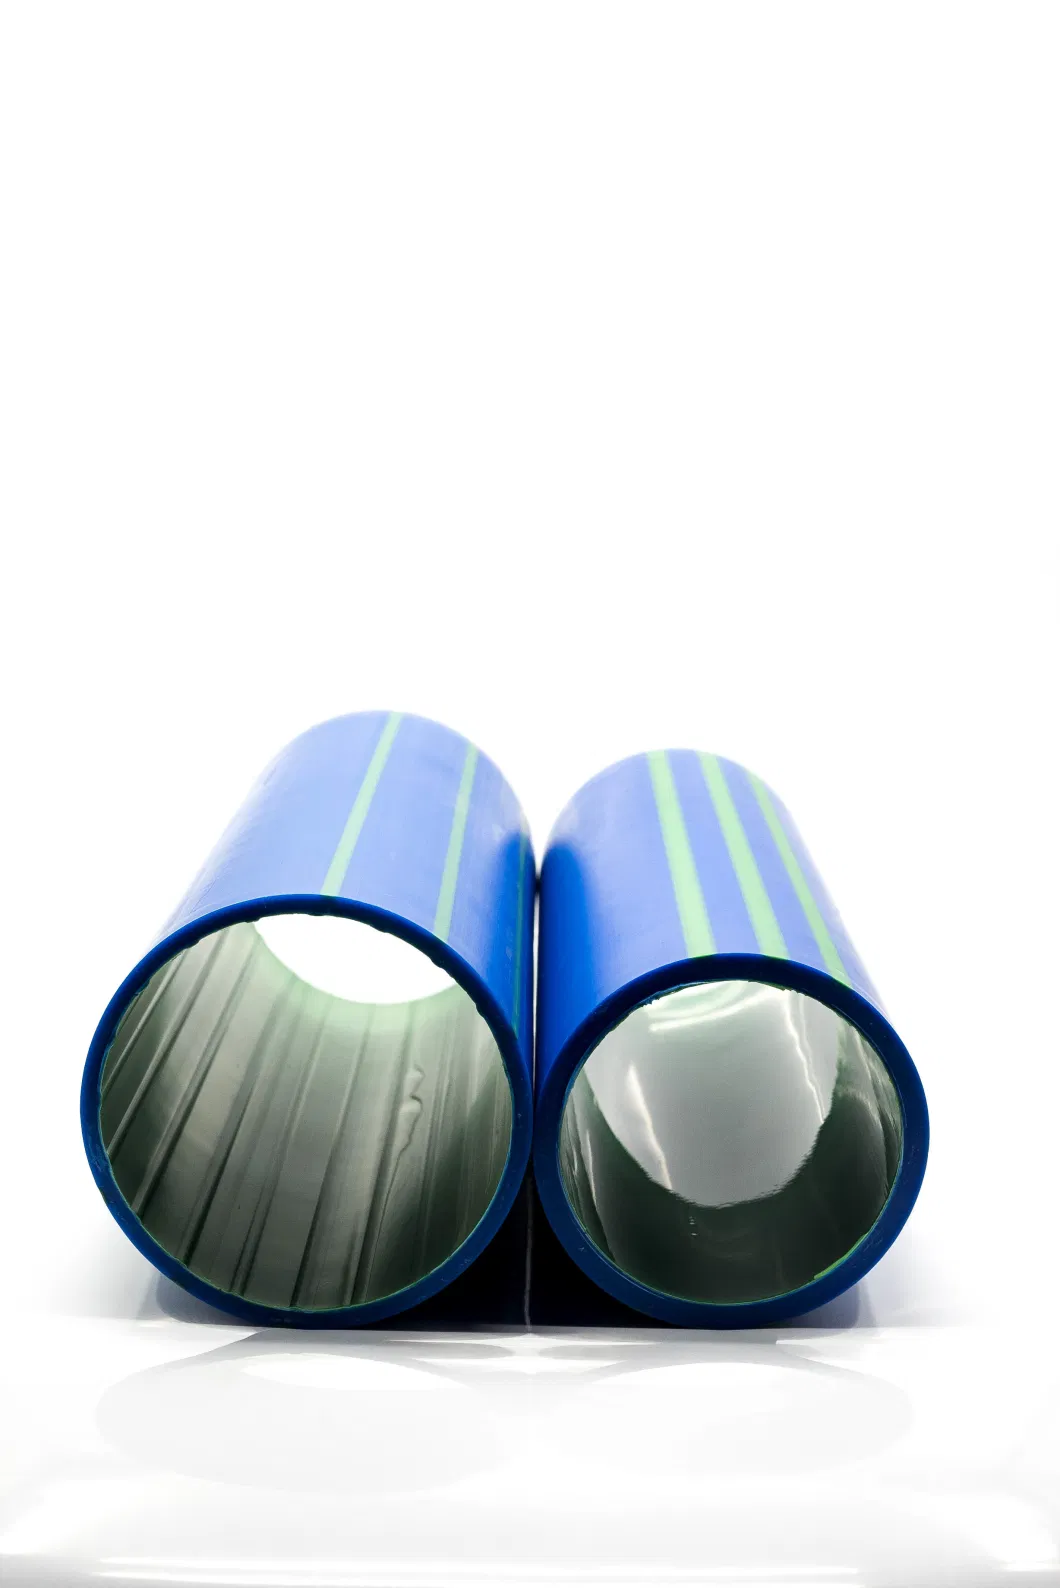 Single-Layer of Oil Pipeline for Gas Station Composite Tubing Oil Tube